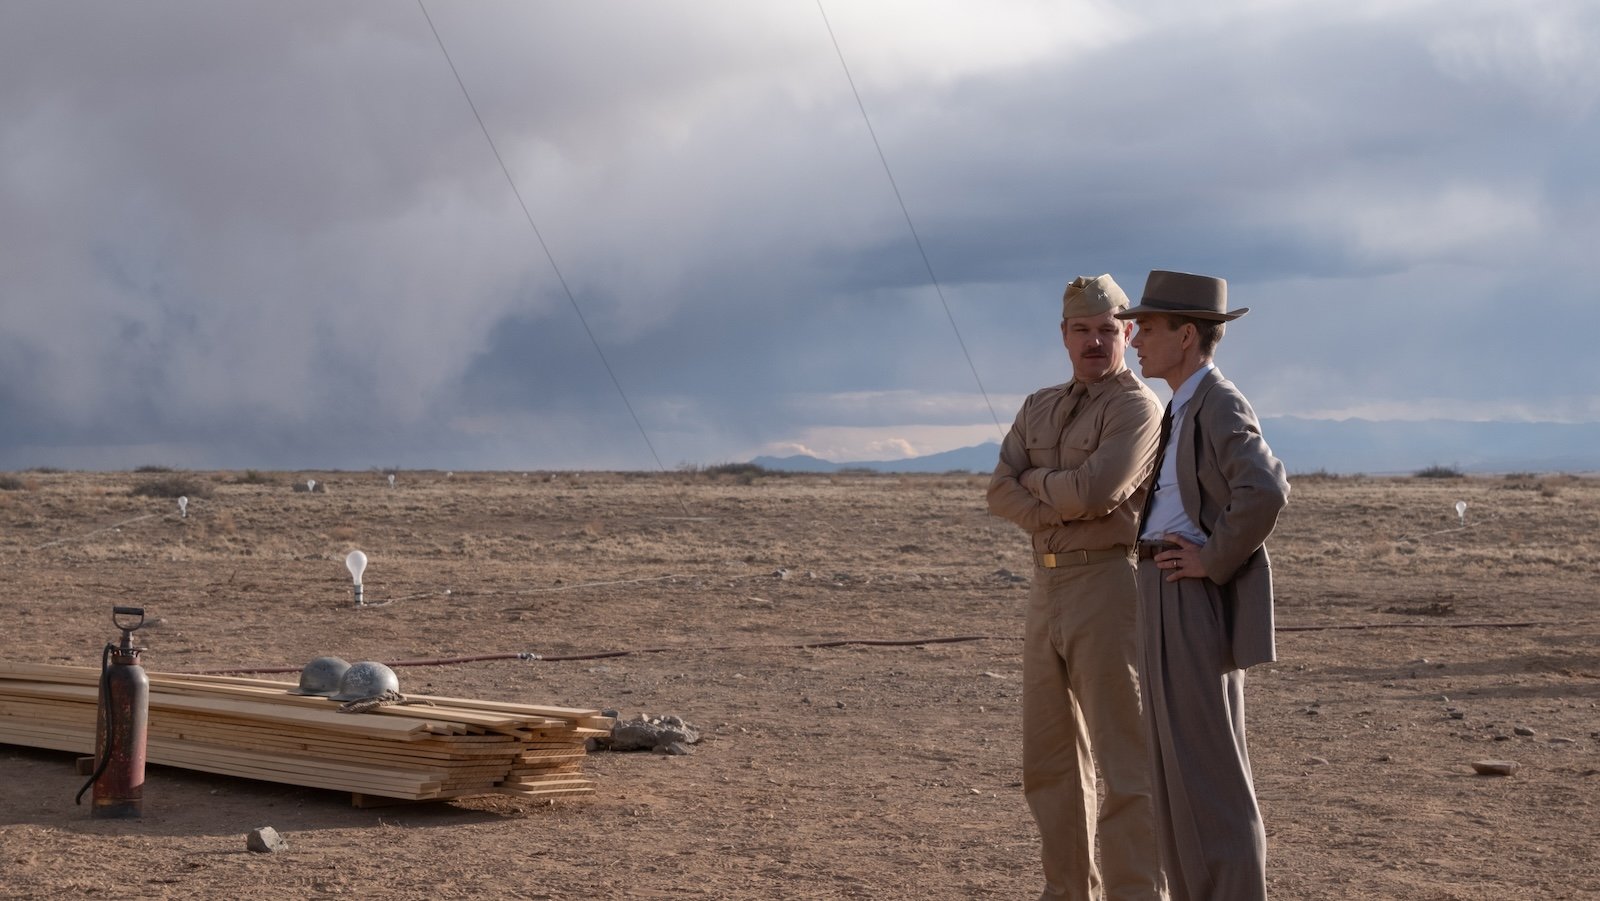 A man in a suit and fedora stands next to a man in military uniform against a vast desert background